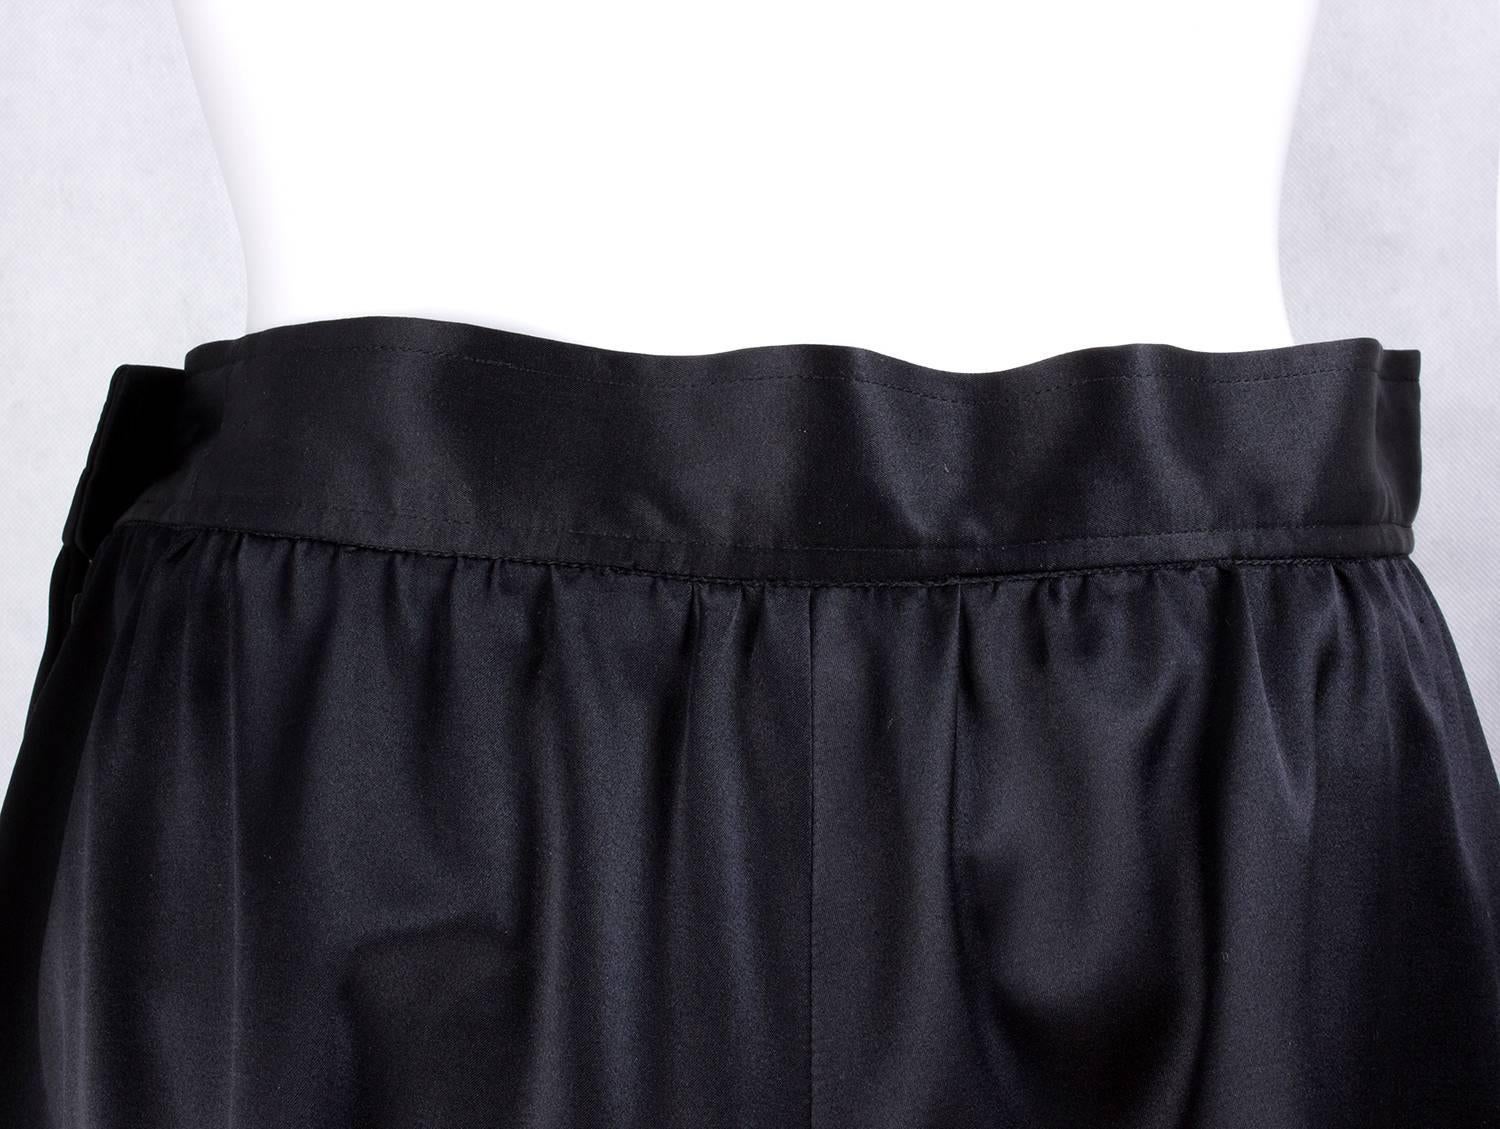 Saint Laurent black large silk satin skirt featuring a fitted waistband, two side pockets, side button and zip opening, 1980 circa

Brand: Yves Saint Laurent

Size : 40 eu, 10-12 UK, 6-8 US

Material: silk satin

Condition: good condition, Some